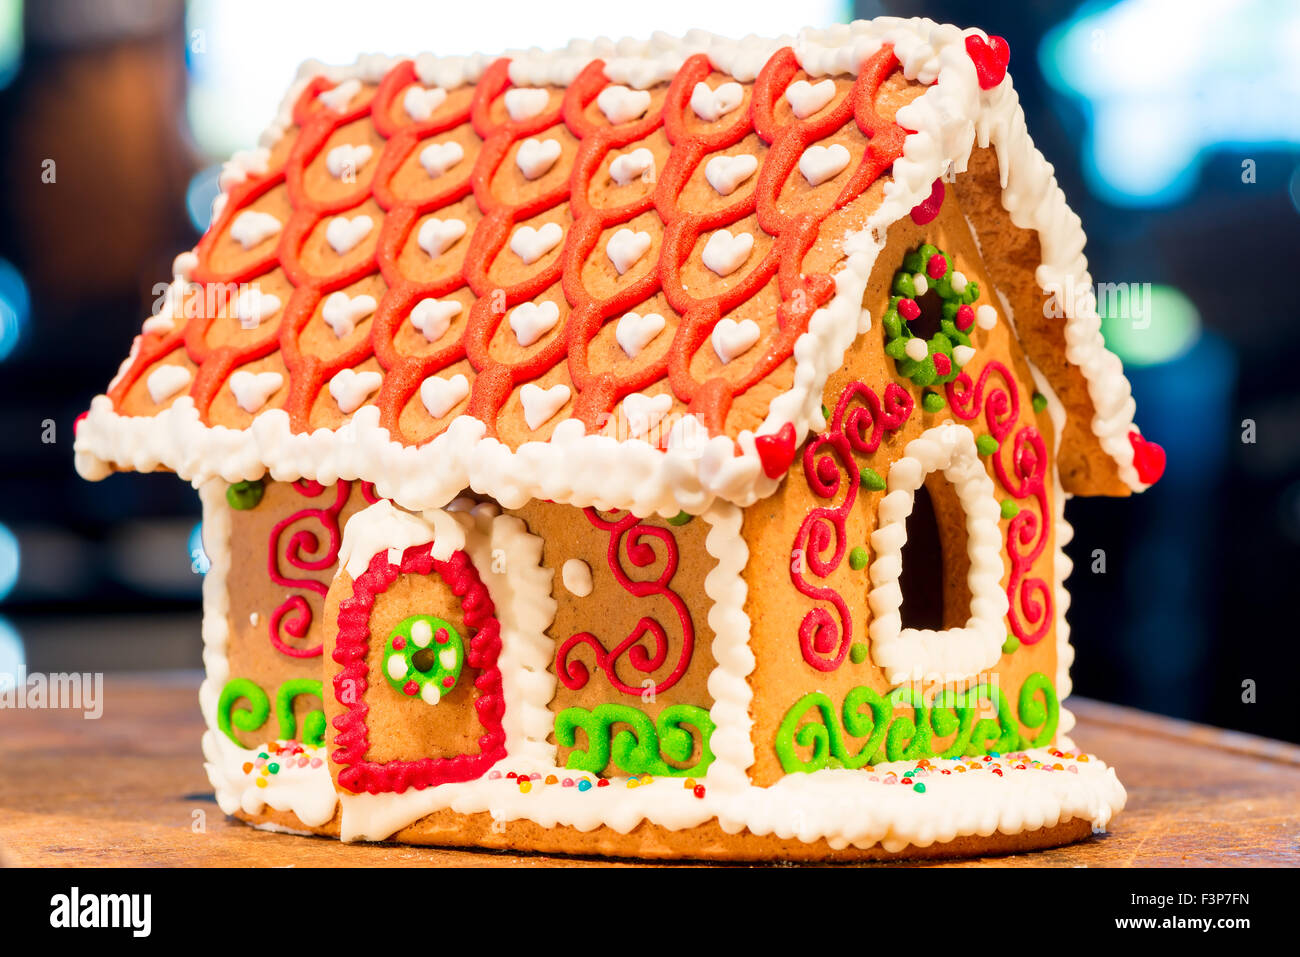 homemade gingerbread house is photographed close-up Stock Photo